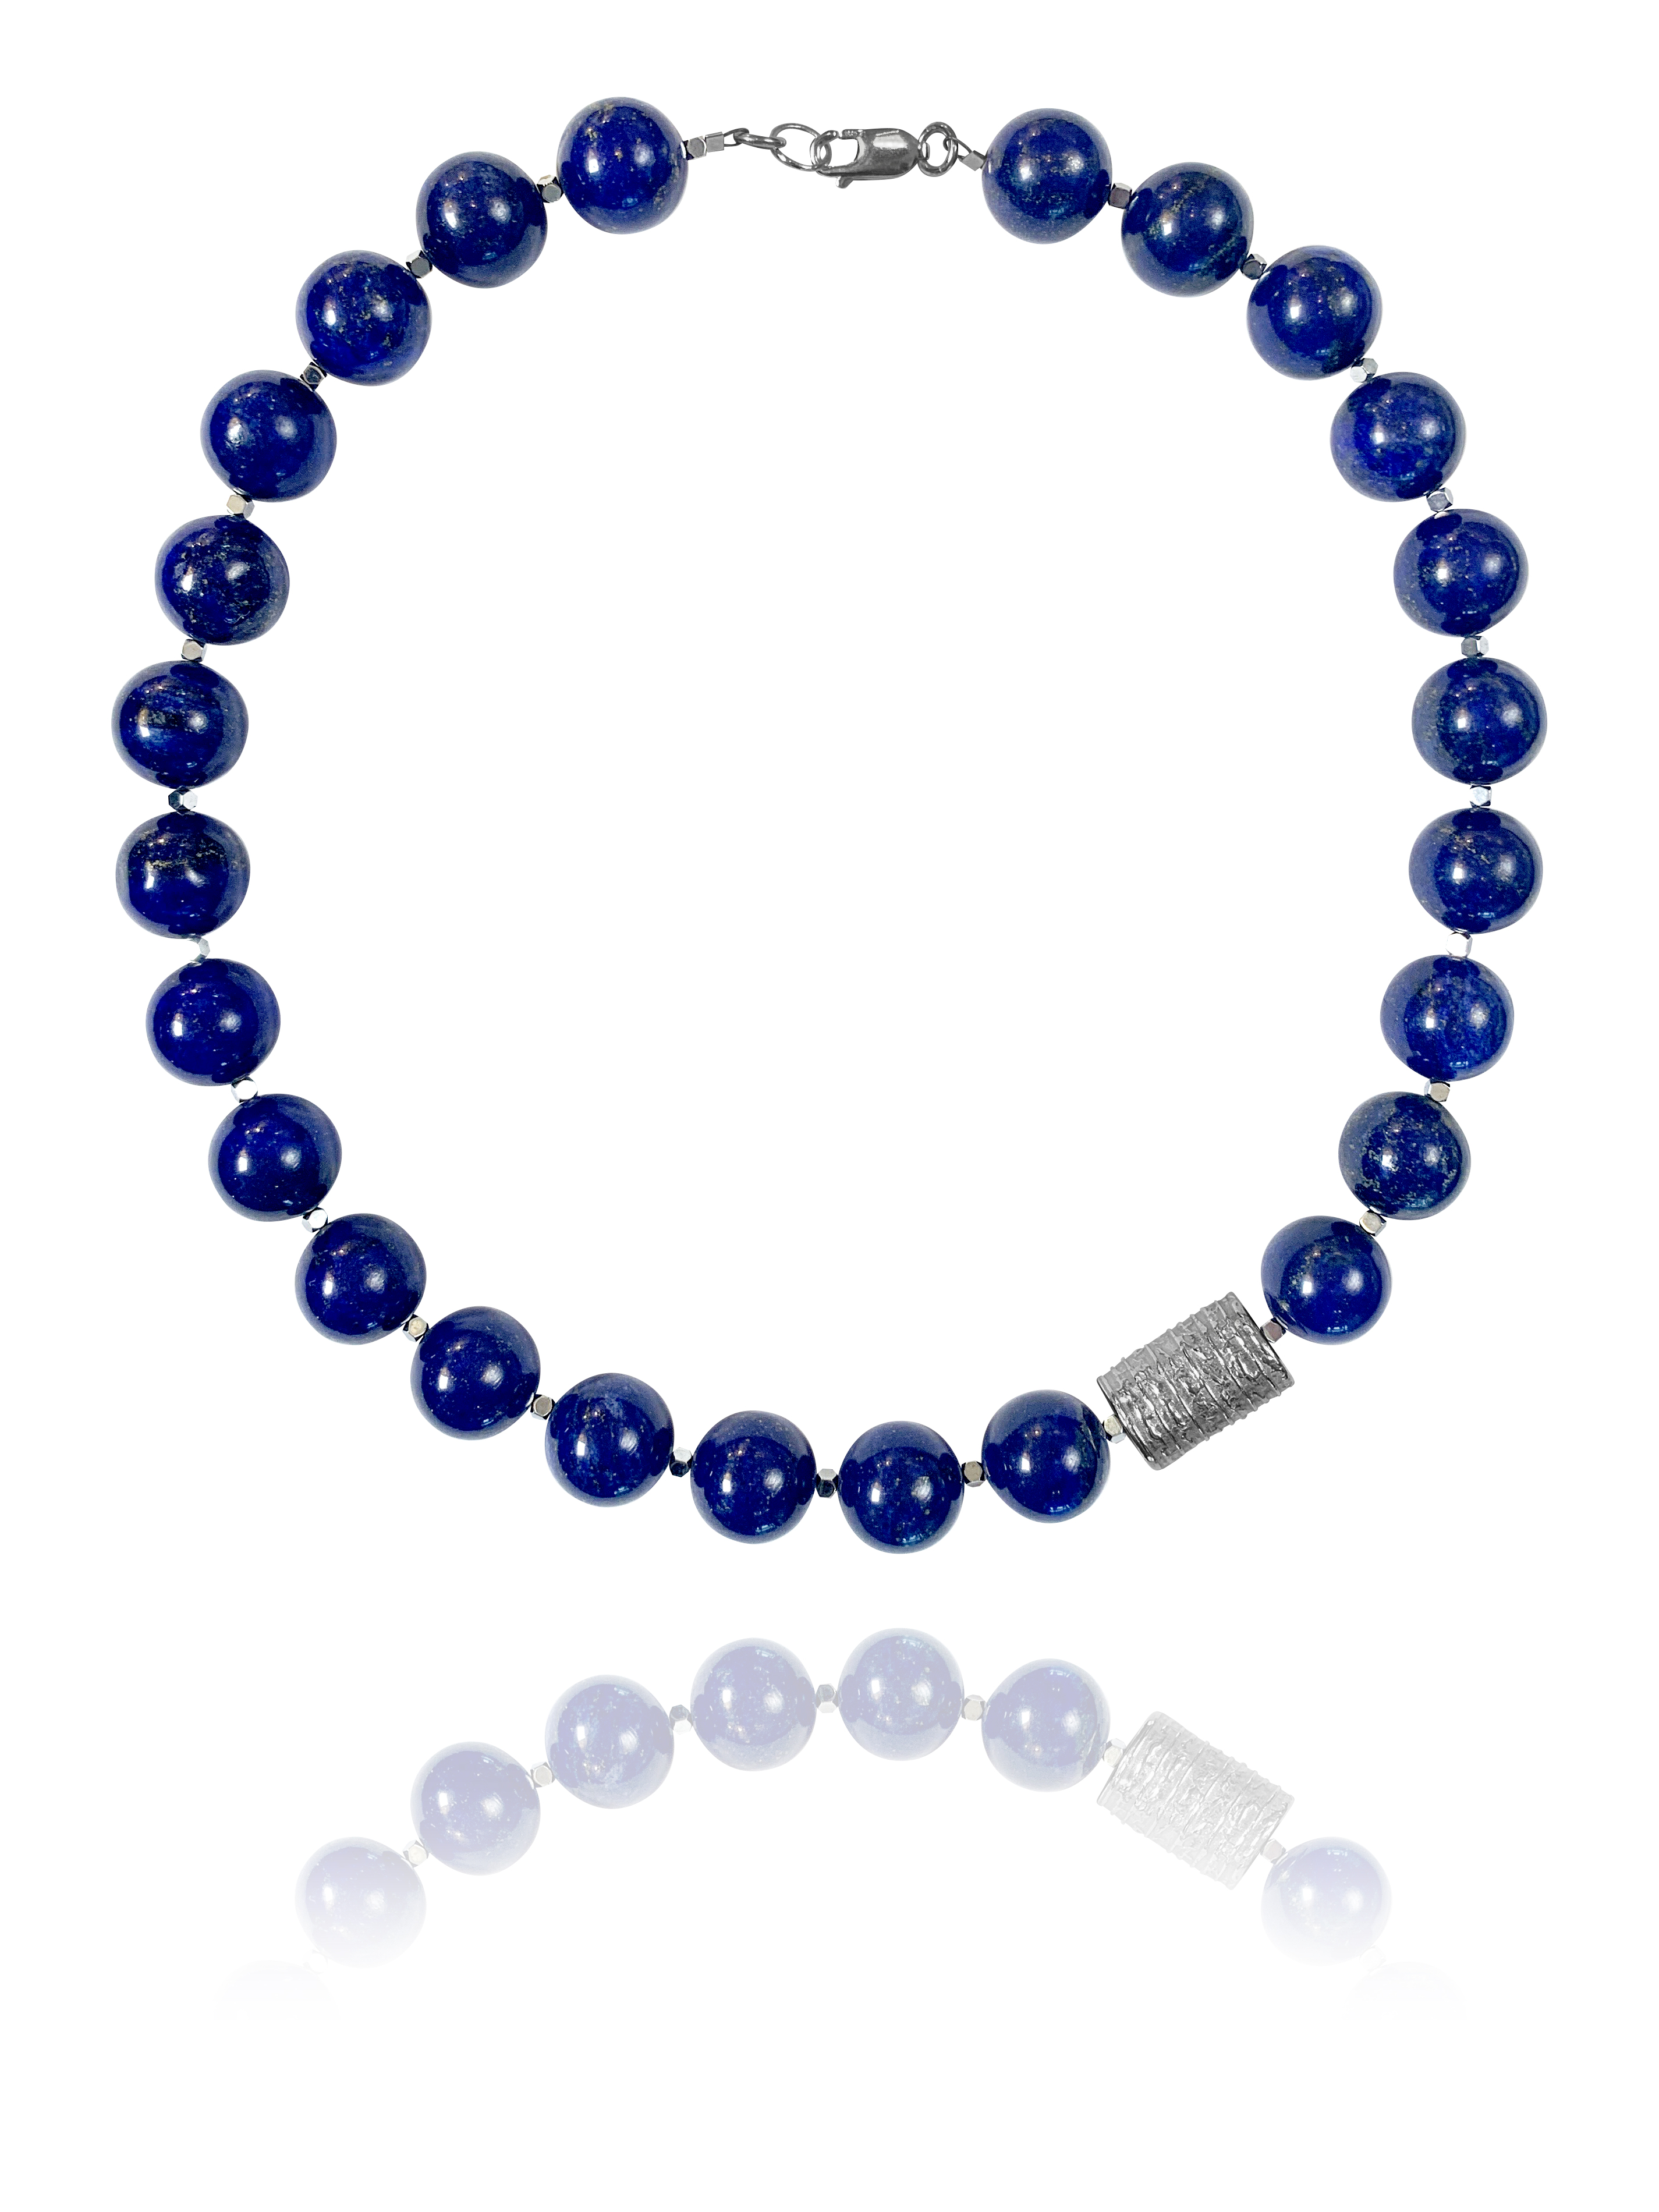 Bead necklace silver round lapis